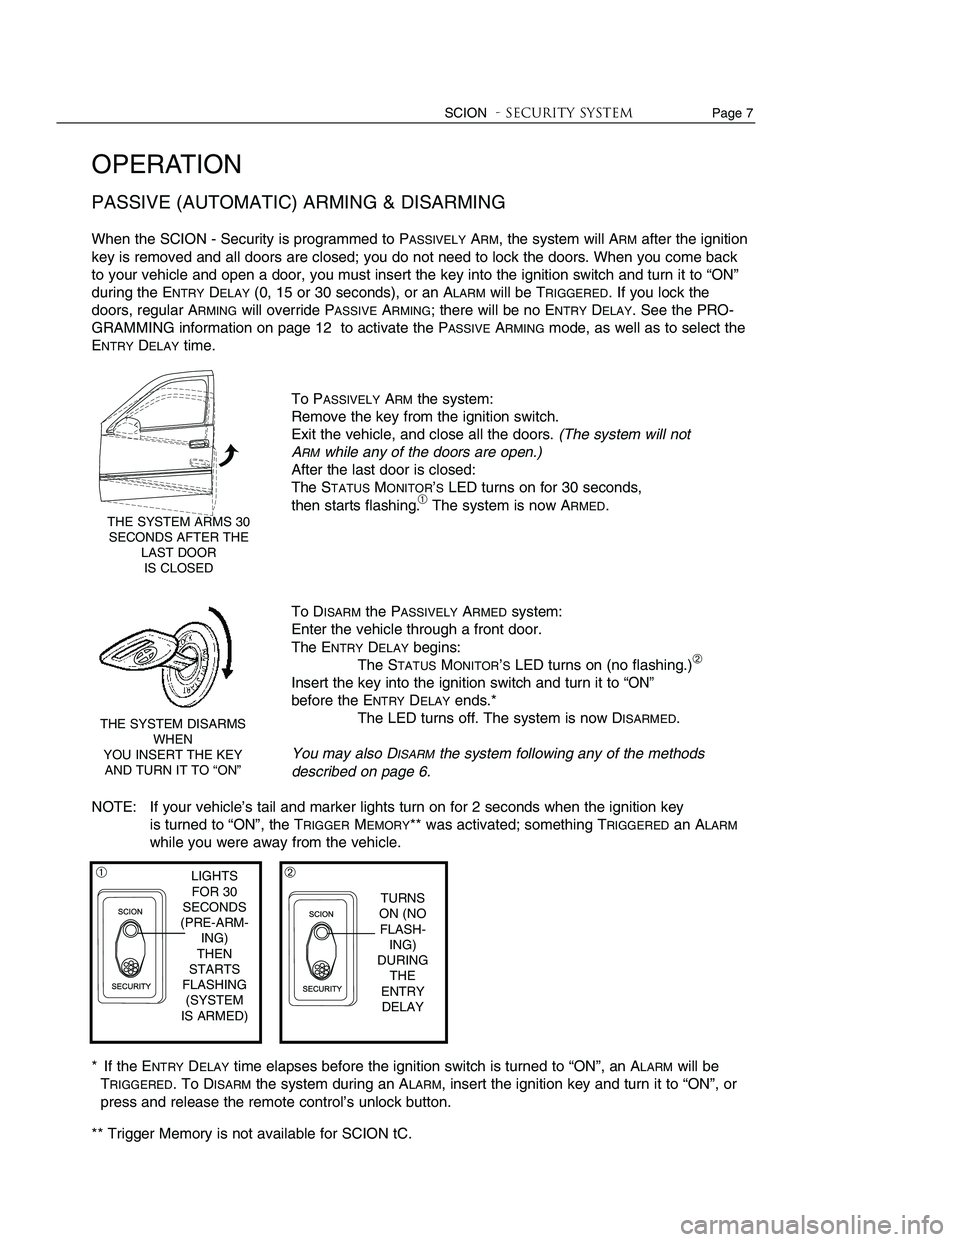 TOYOTA tC 2007  Accessories, Audio & Navigation (in English) 
Page 6                    SCION- Security system
OPERATION
DISARMING THE SECURITY (except PASSIVE DISARMING)
The system may be DISARMEDin several ways. Do one of the following: 
Unlock the doors with